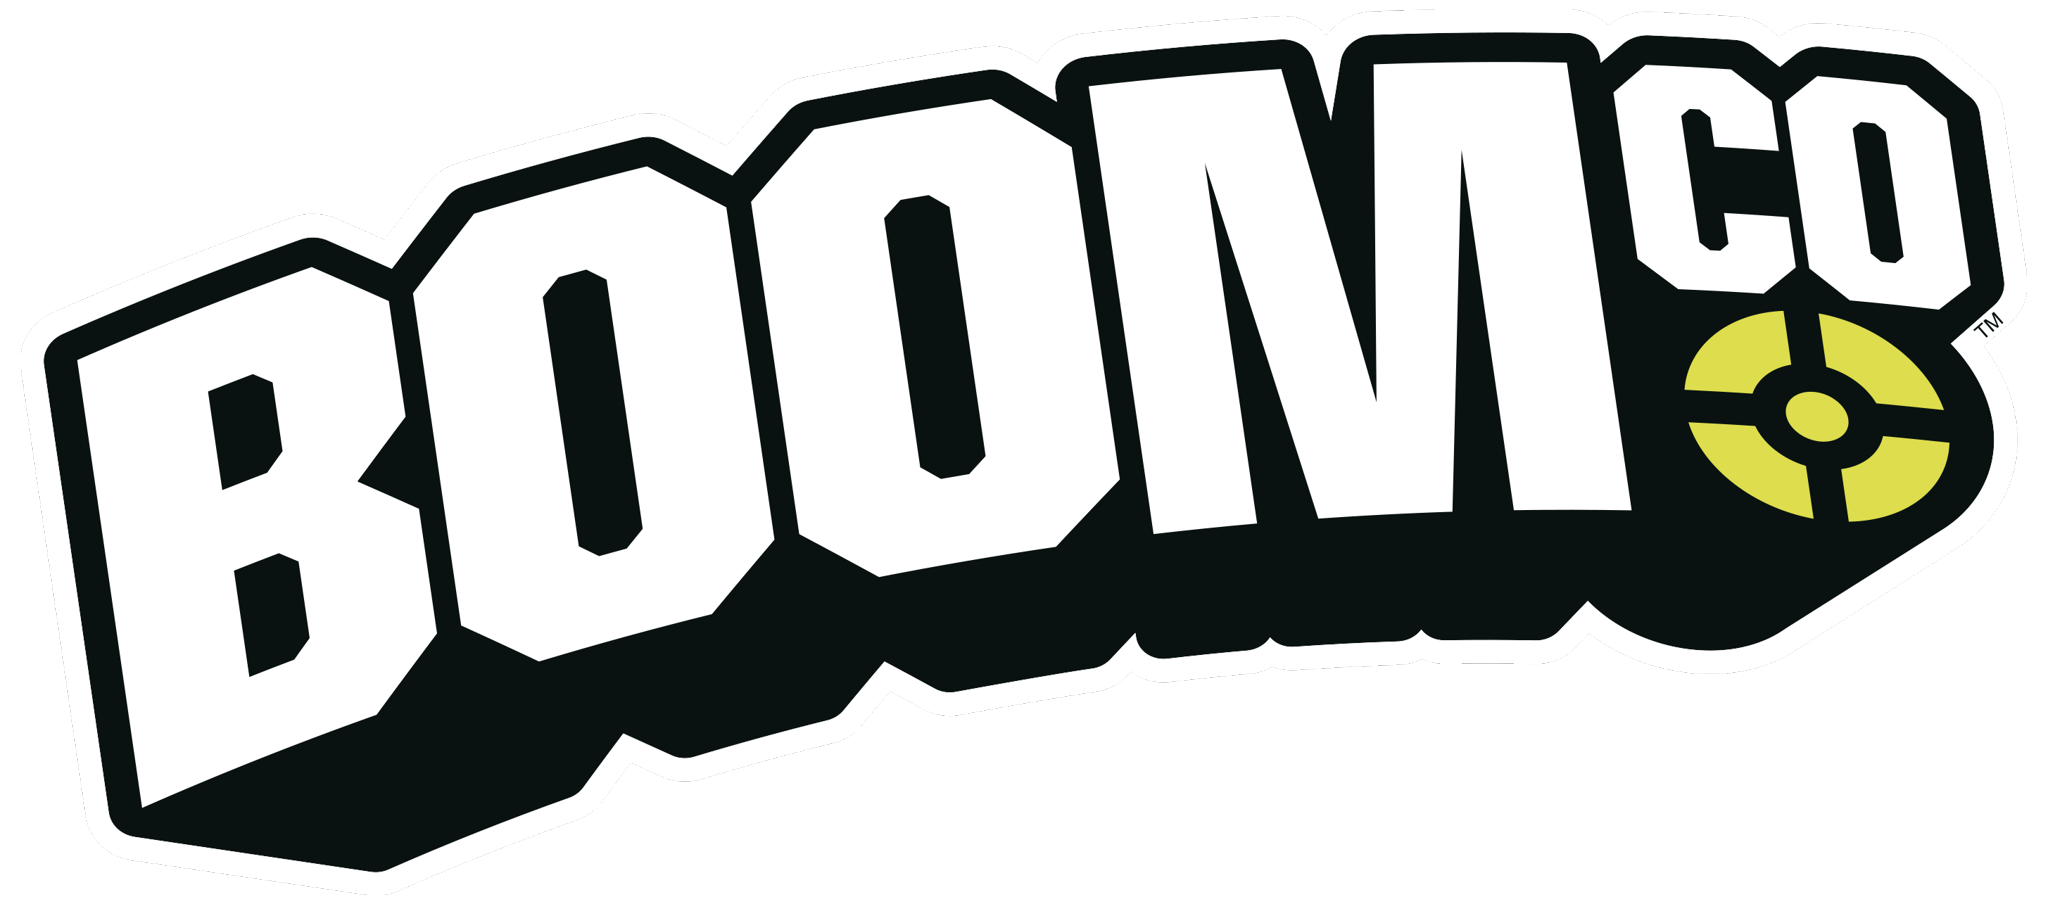 https://file.hstatic.net/1000206615/collection/boomco-logo.png